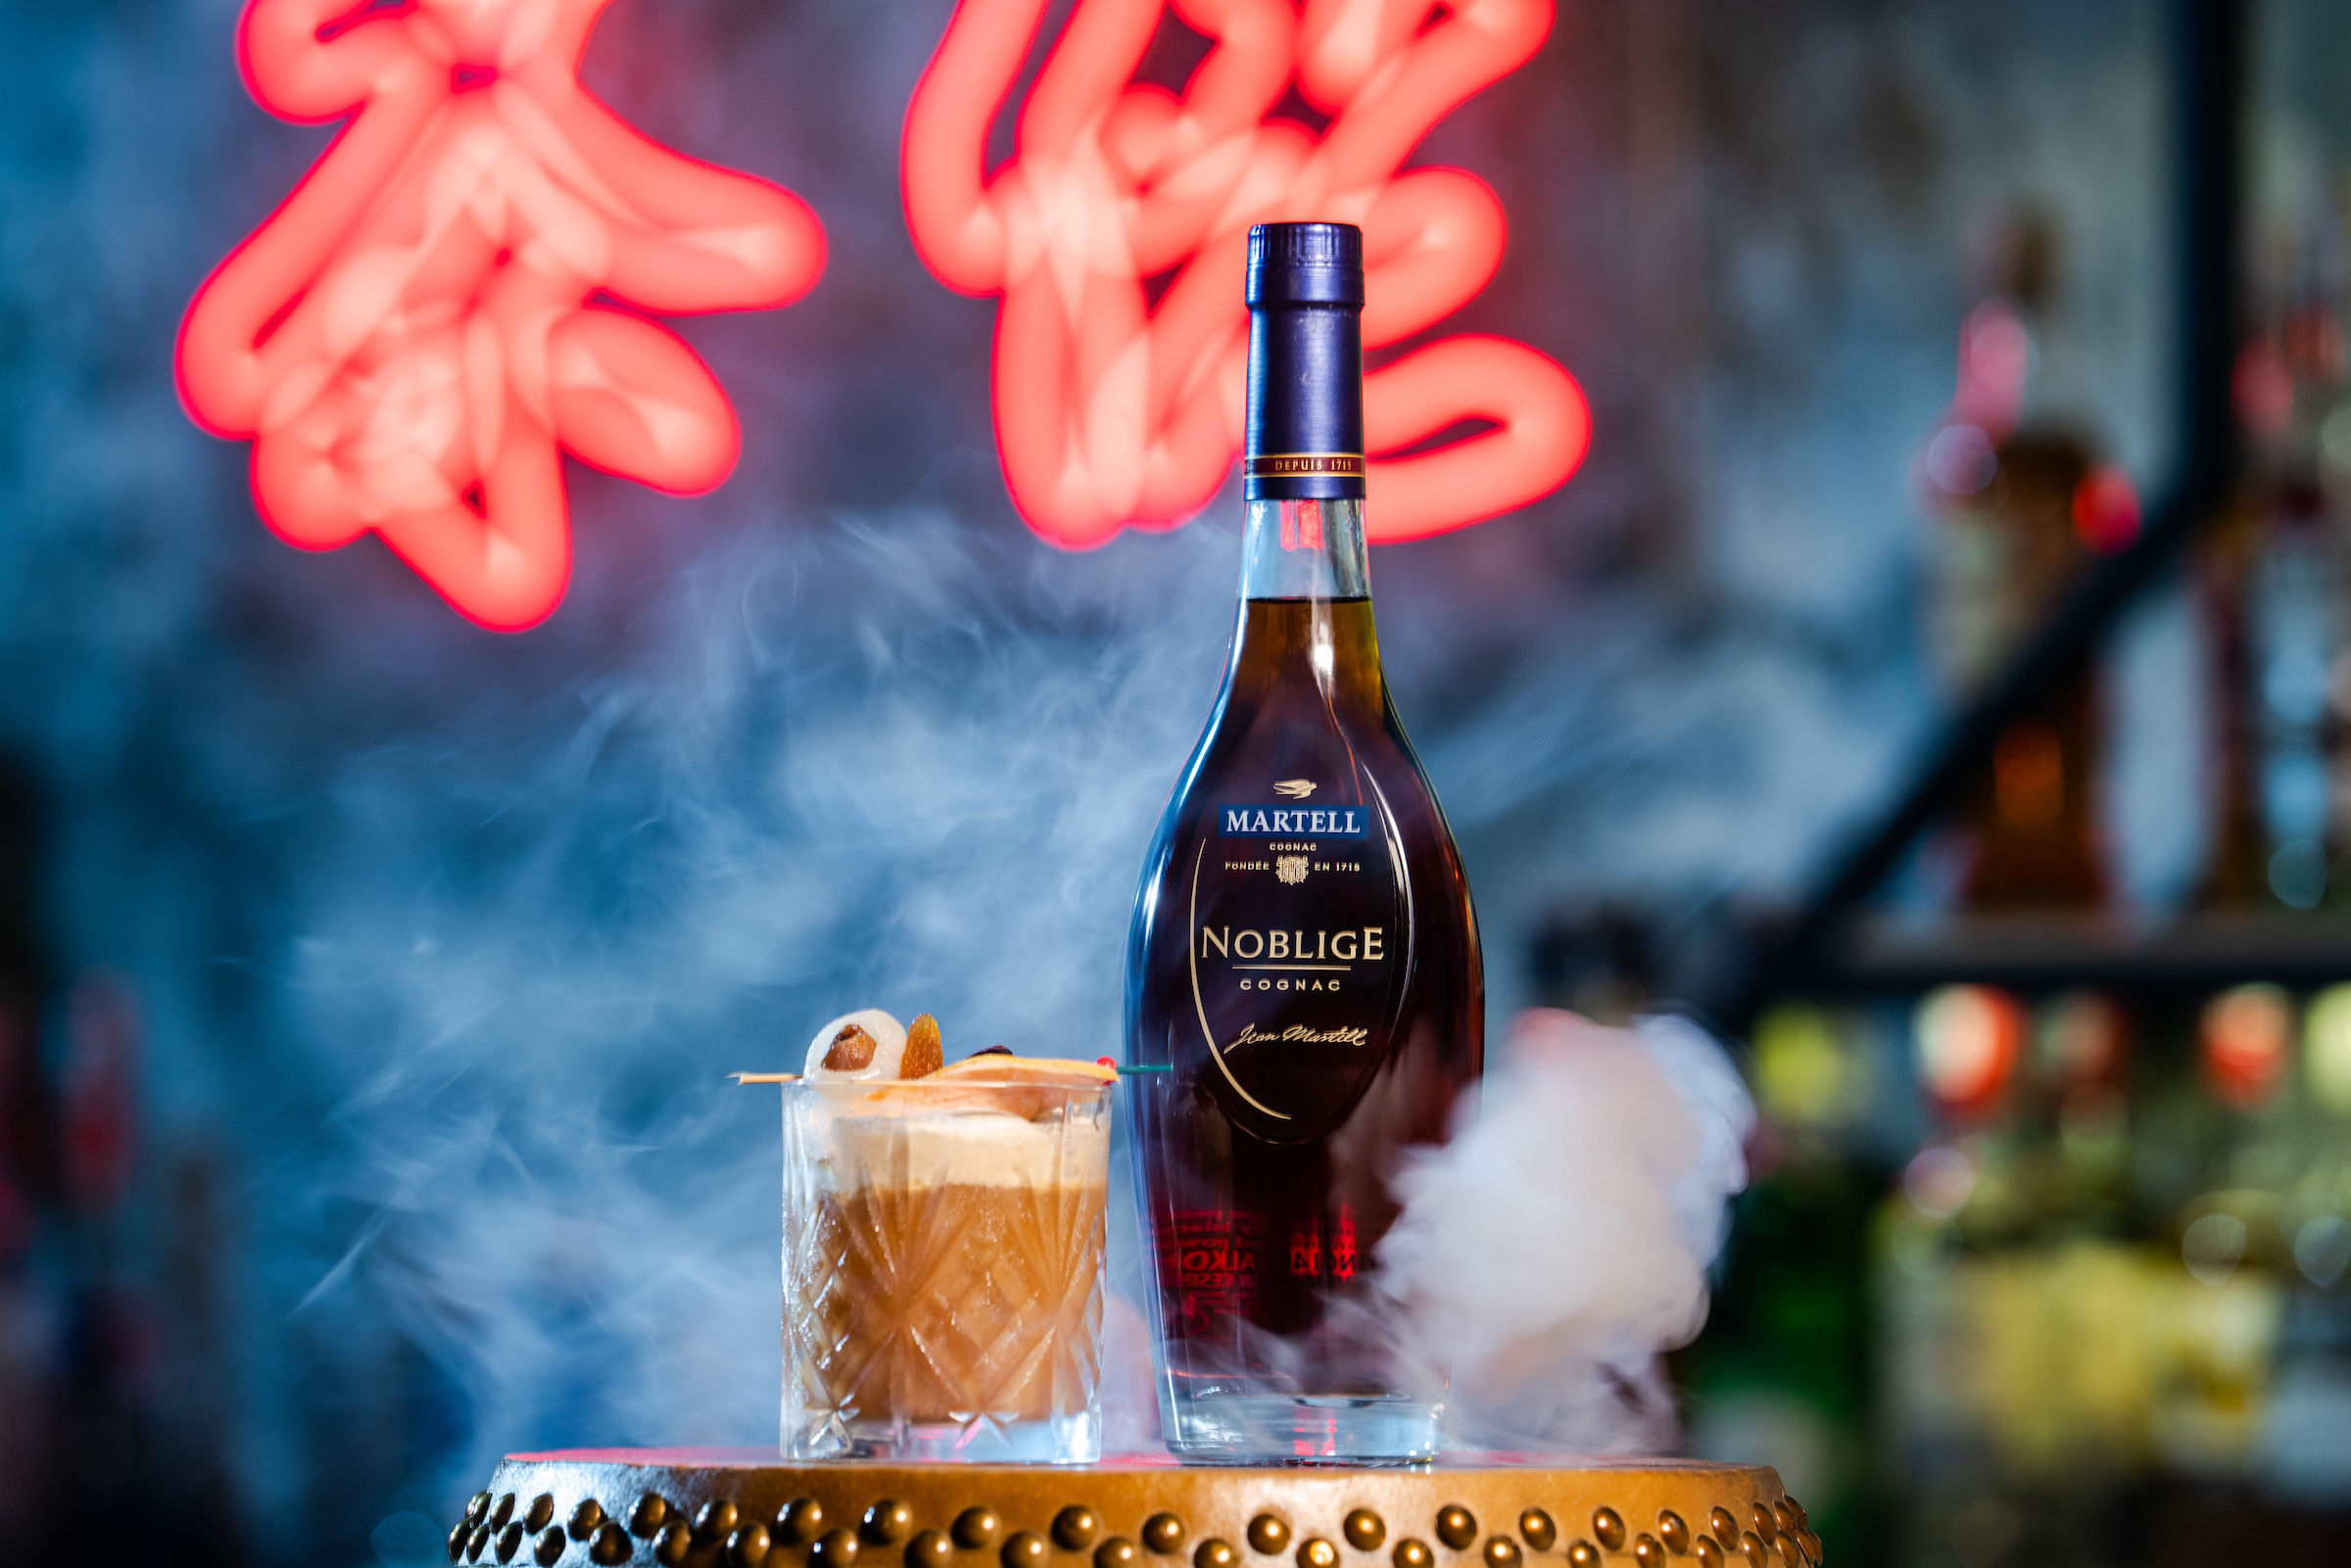 Unlock the Bars: Old Merchant brings out sweet and smoky nuances of gula Melaka with Martell Noblige